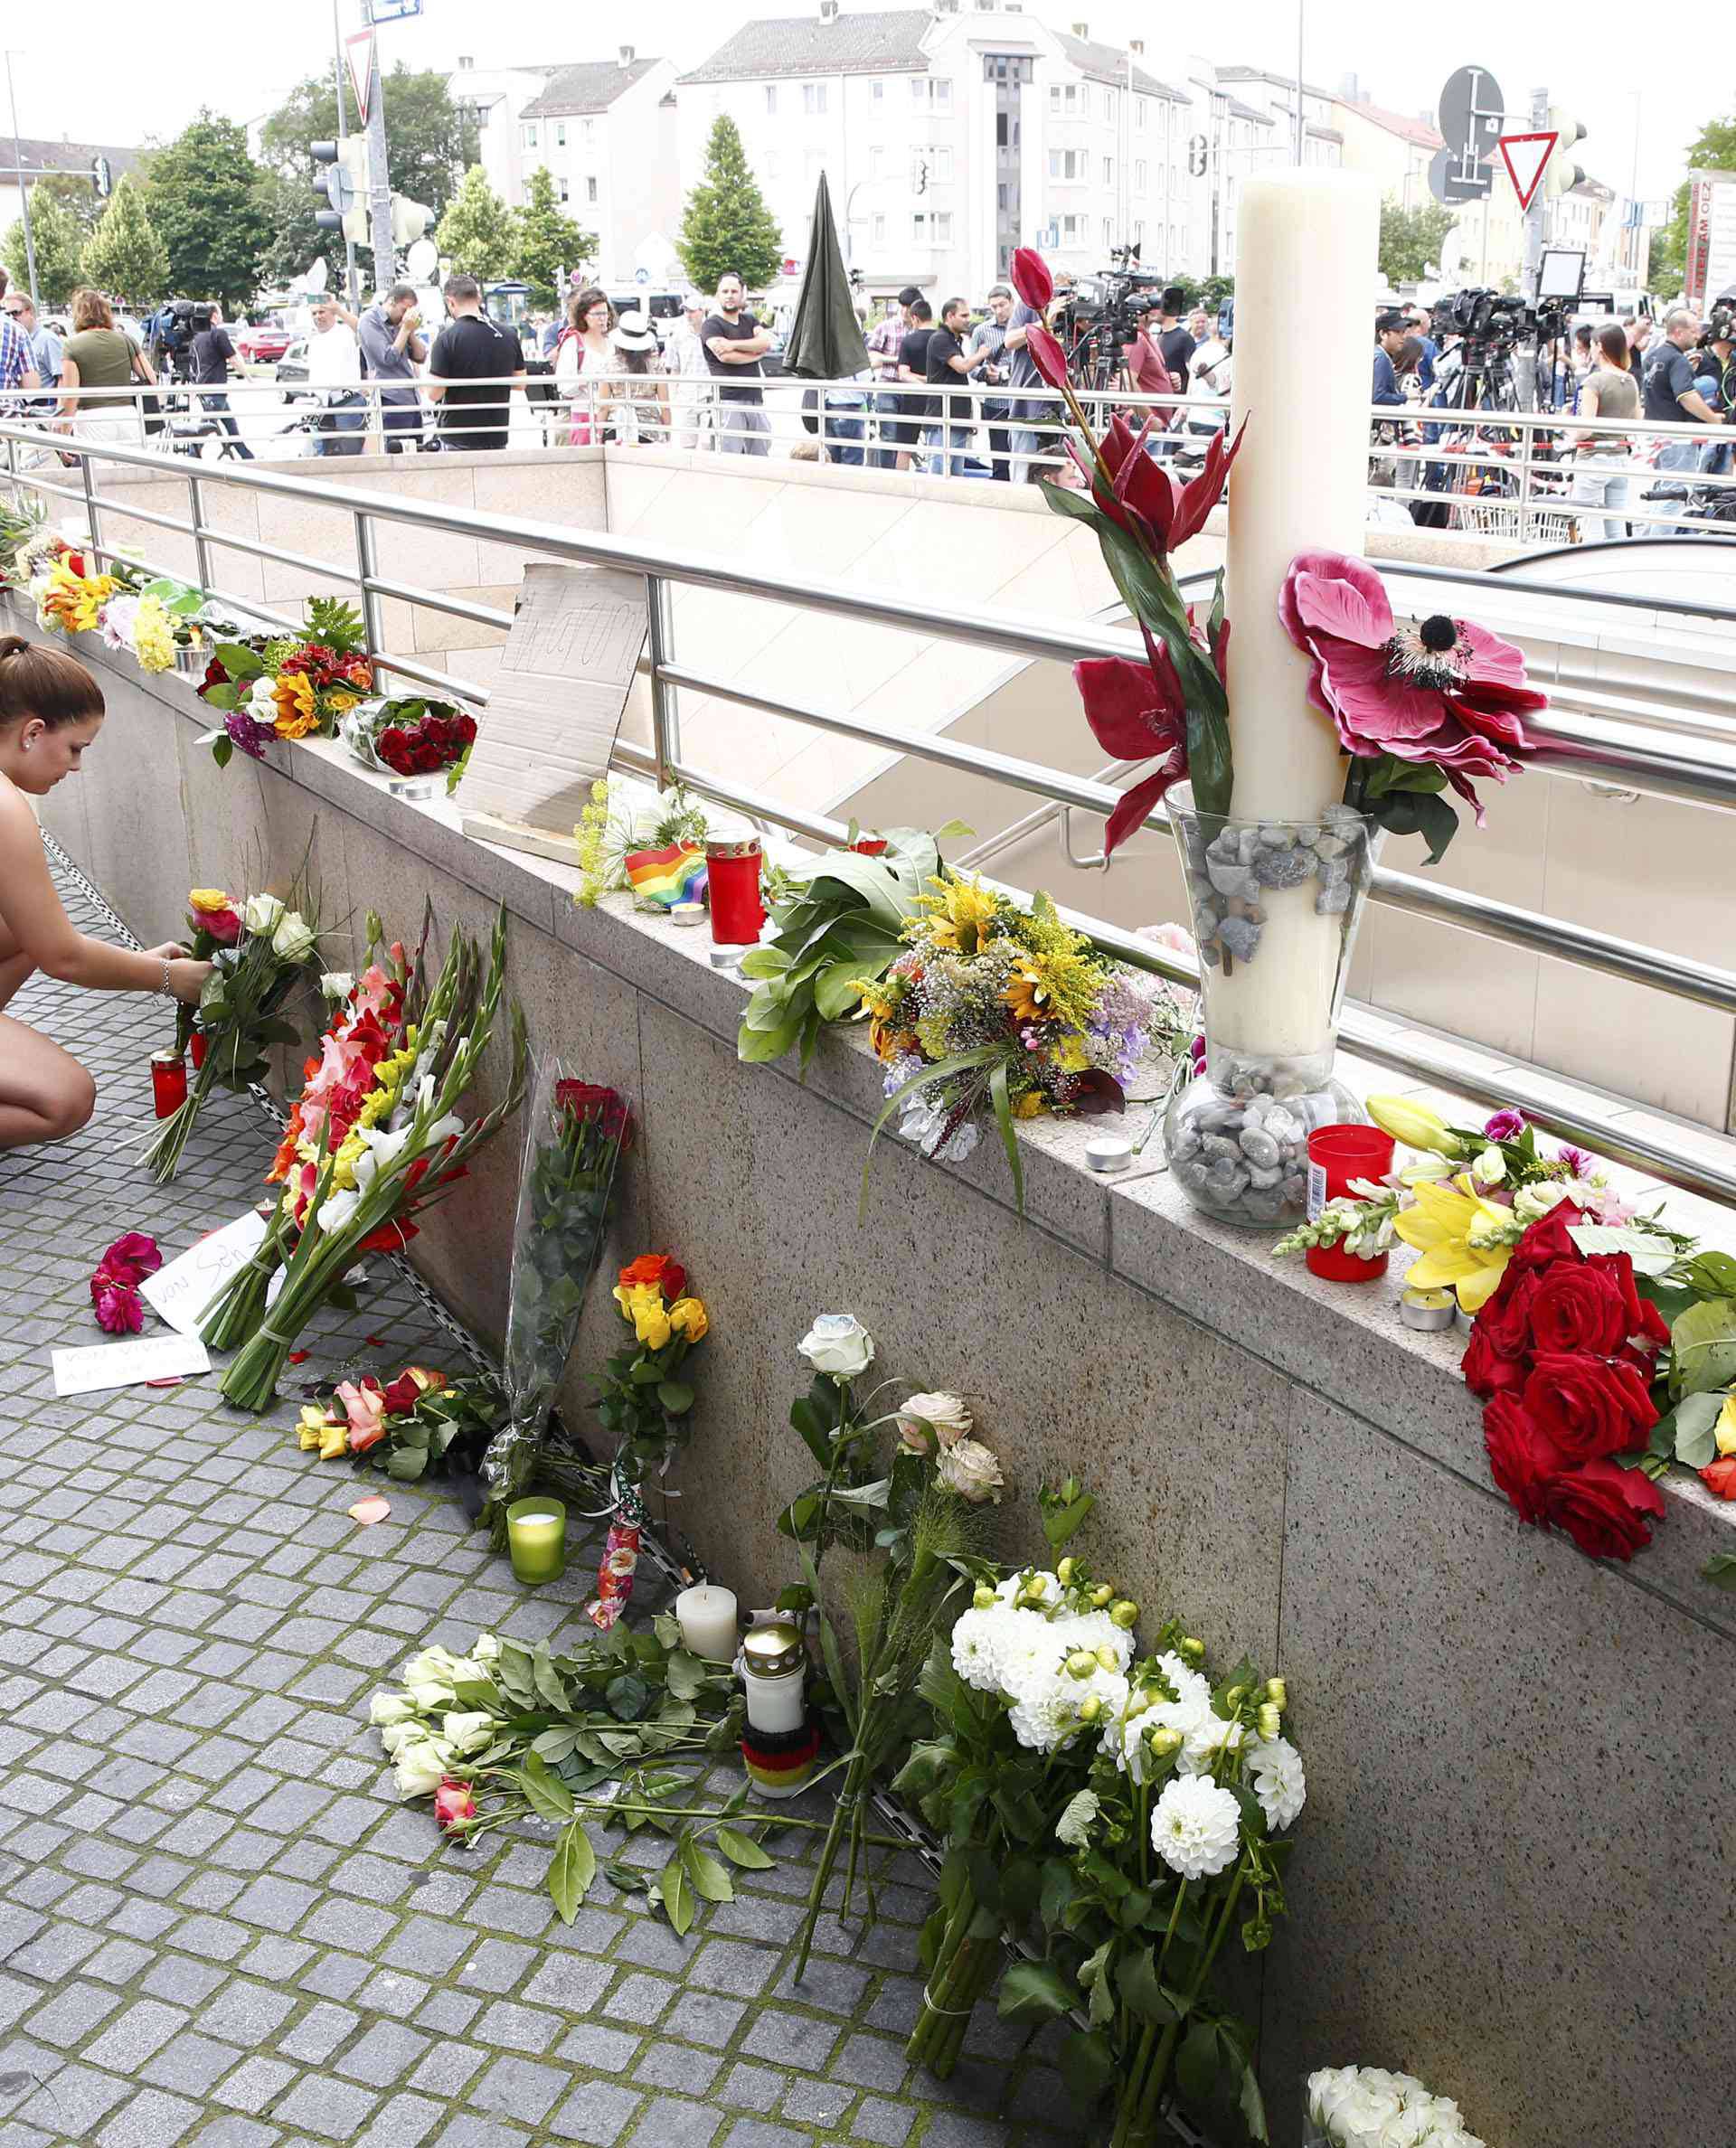 A women places flowers near Olympia shopping mall in Munich